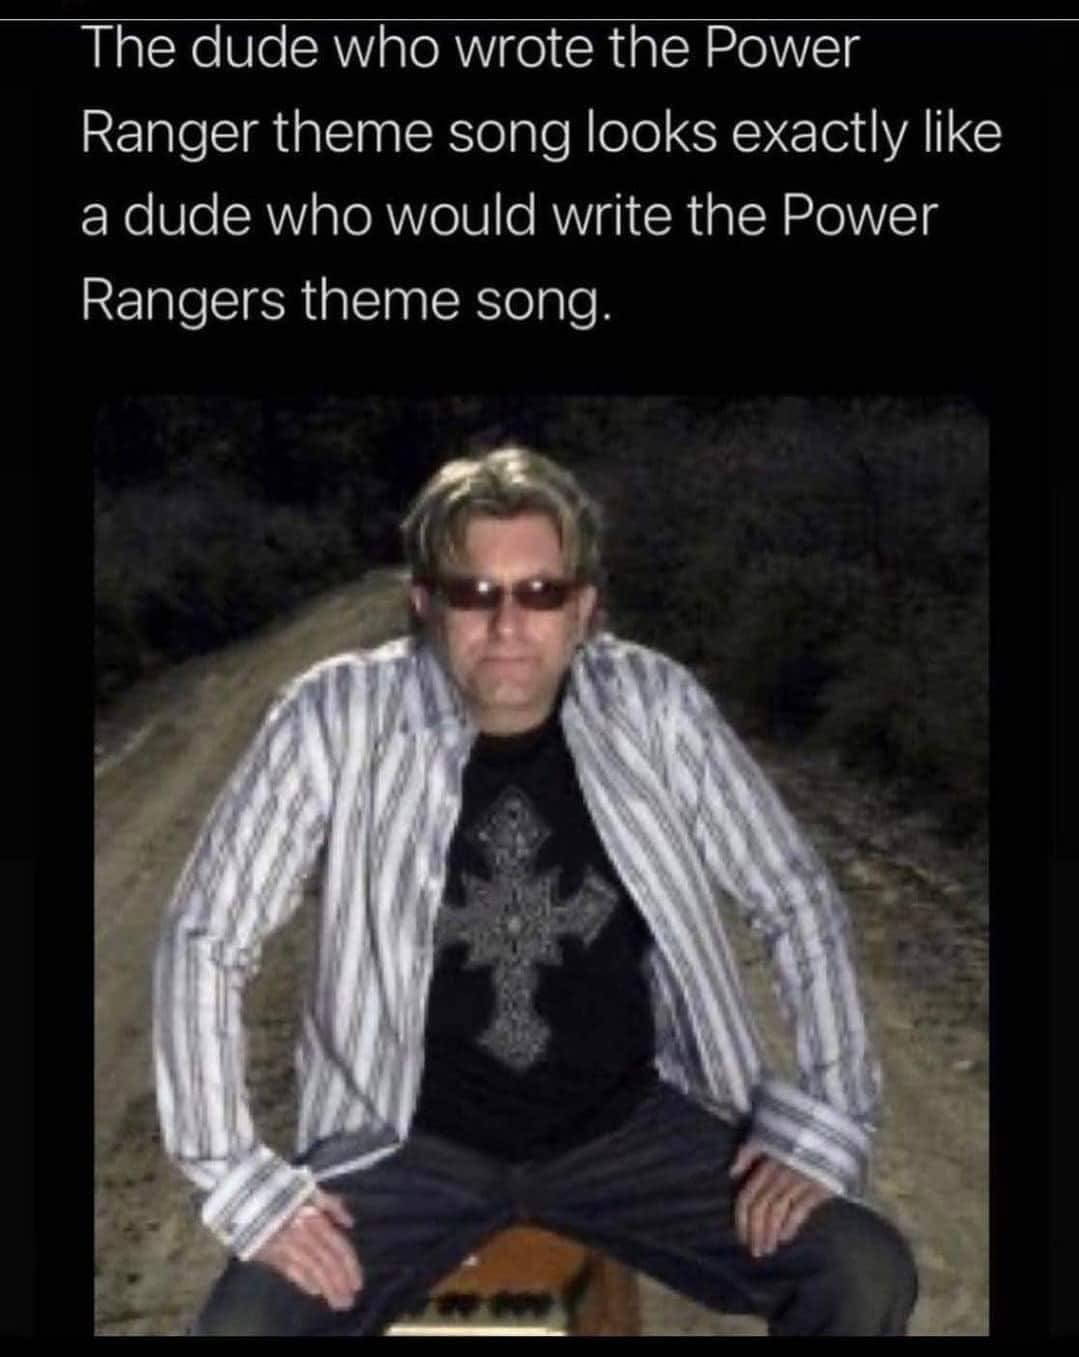 dank memes - funny memes - ron wasserman - The dude who wrote the Power Ranger theme song looks exactly a dude who would write the Power Rangers theme song.